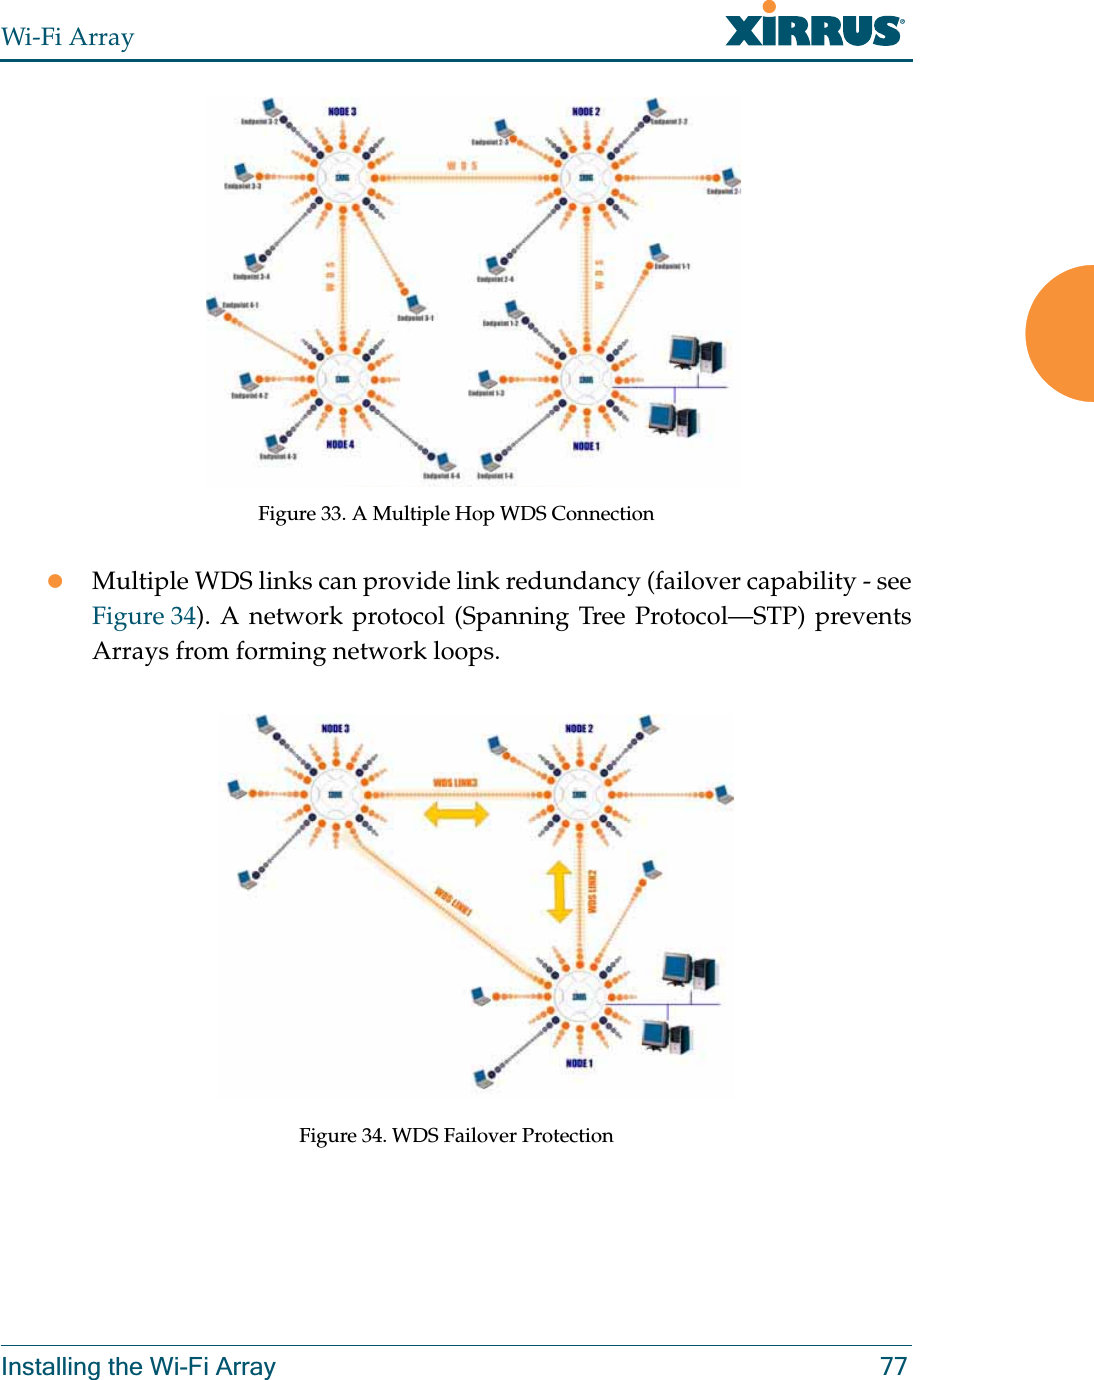 Wi-Fi ArrayInstalling the Wi-Fi Array 77Figure 33. A Multiple Hop WDS ConnectionzMultiple WDS links can provide link redundancy (failover capability - see Figure 34). A network protocol (Spanning Tree Protocol—STP) prevents Arrays from forming network loops. Figure 34. WDS Failover Protection